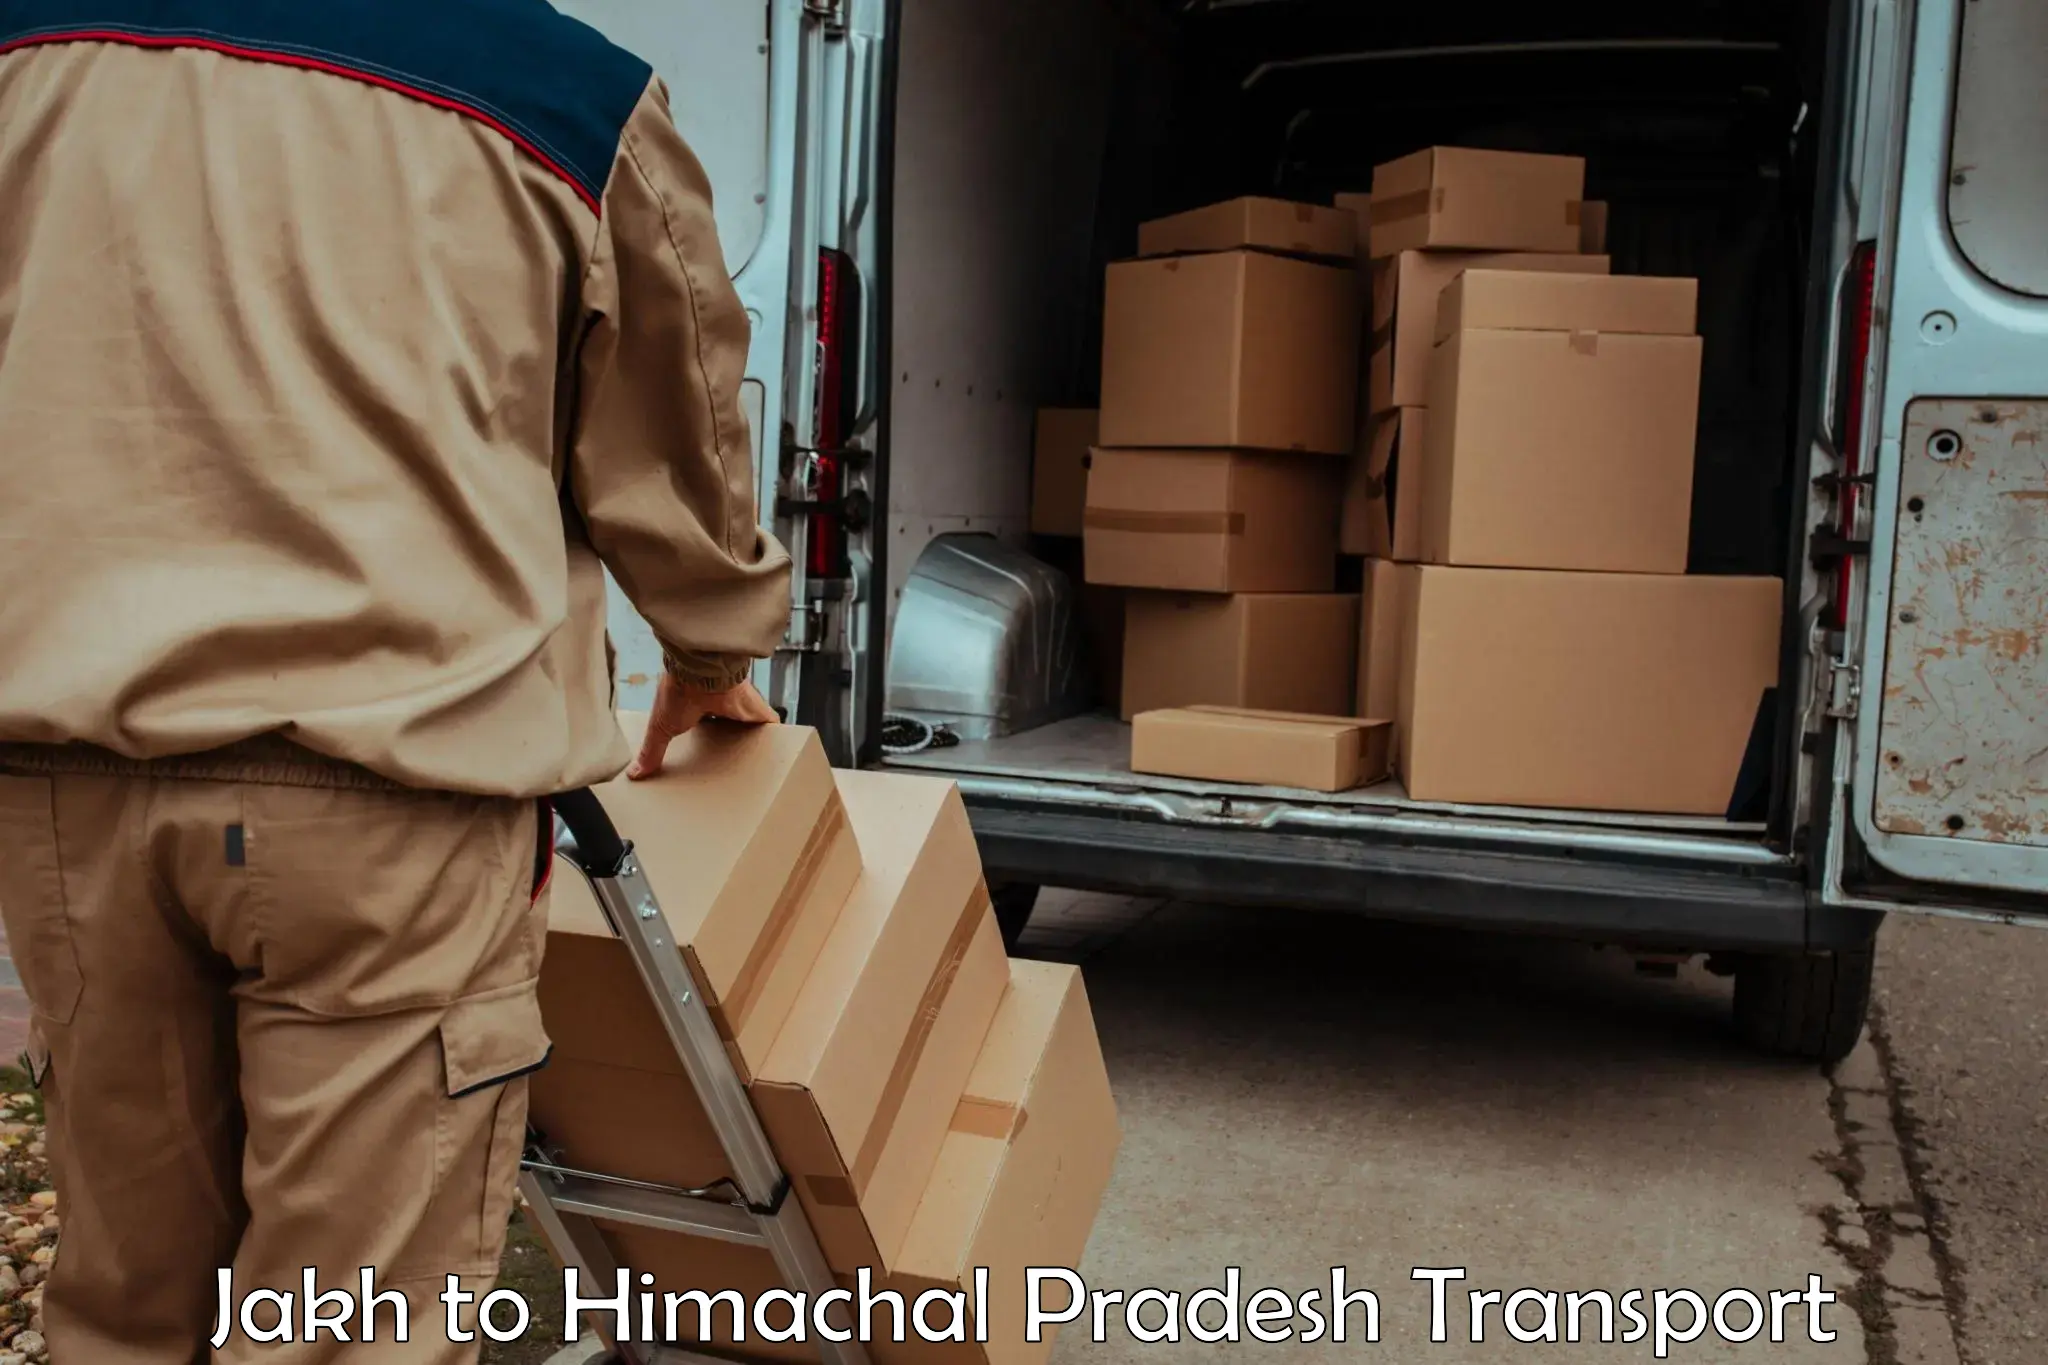 Part load transport service in India Jakh to Himachal Pradesh